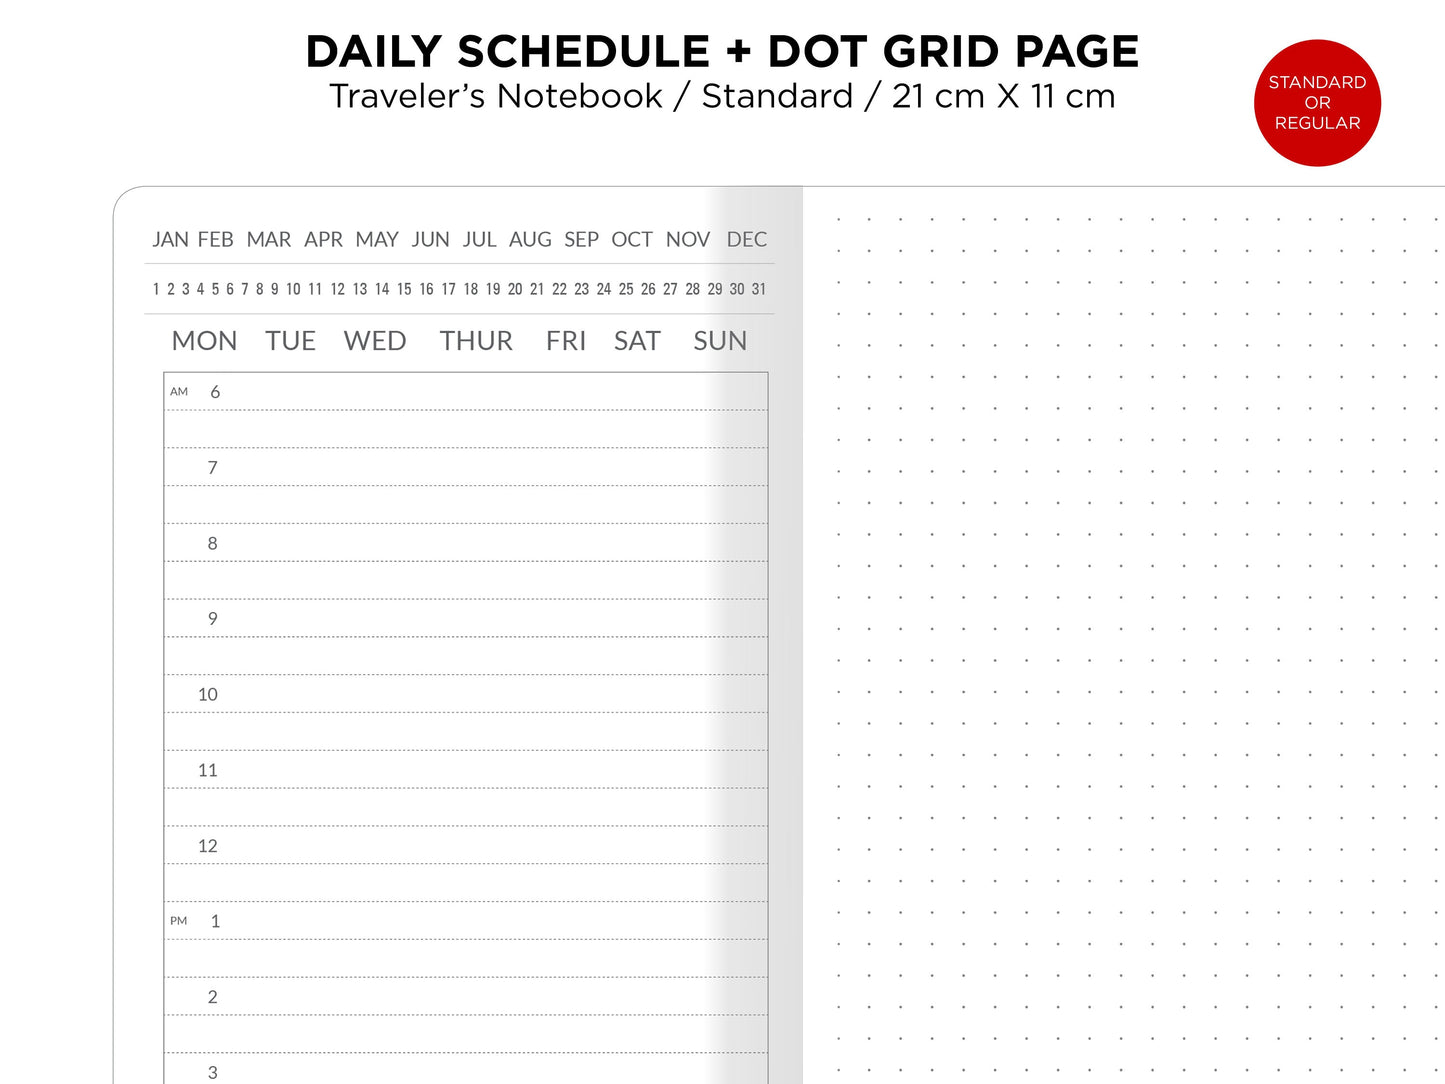 2 Days in A Spread - Standard TN Printable Refill Insert Daily Schedule DOT GRID Traveler's Notebook